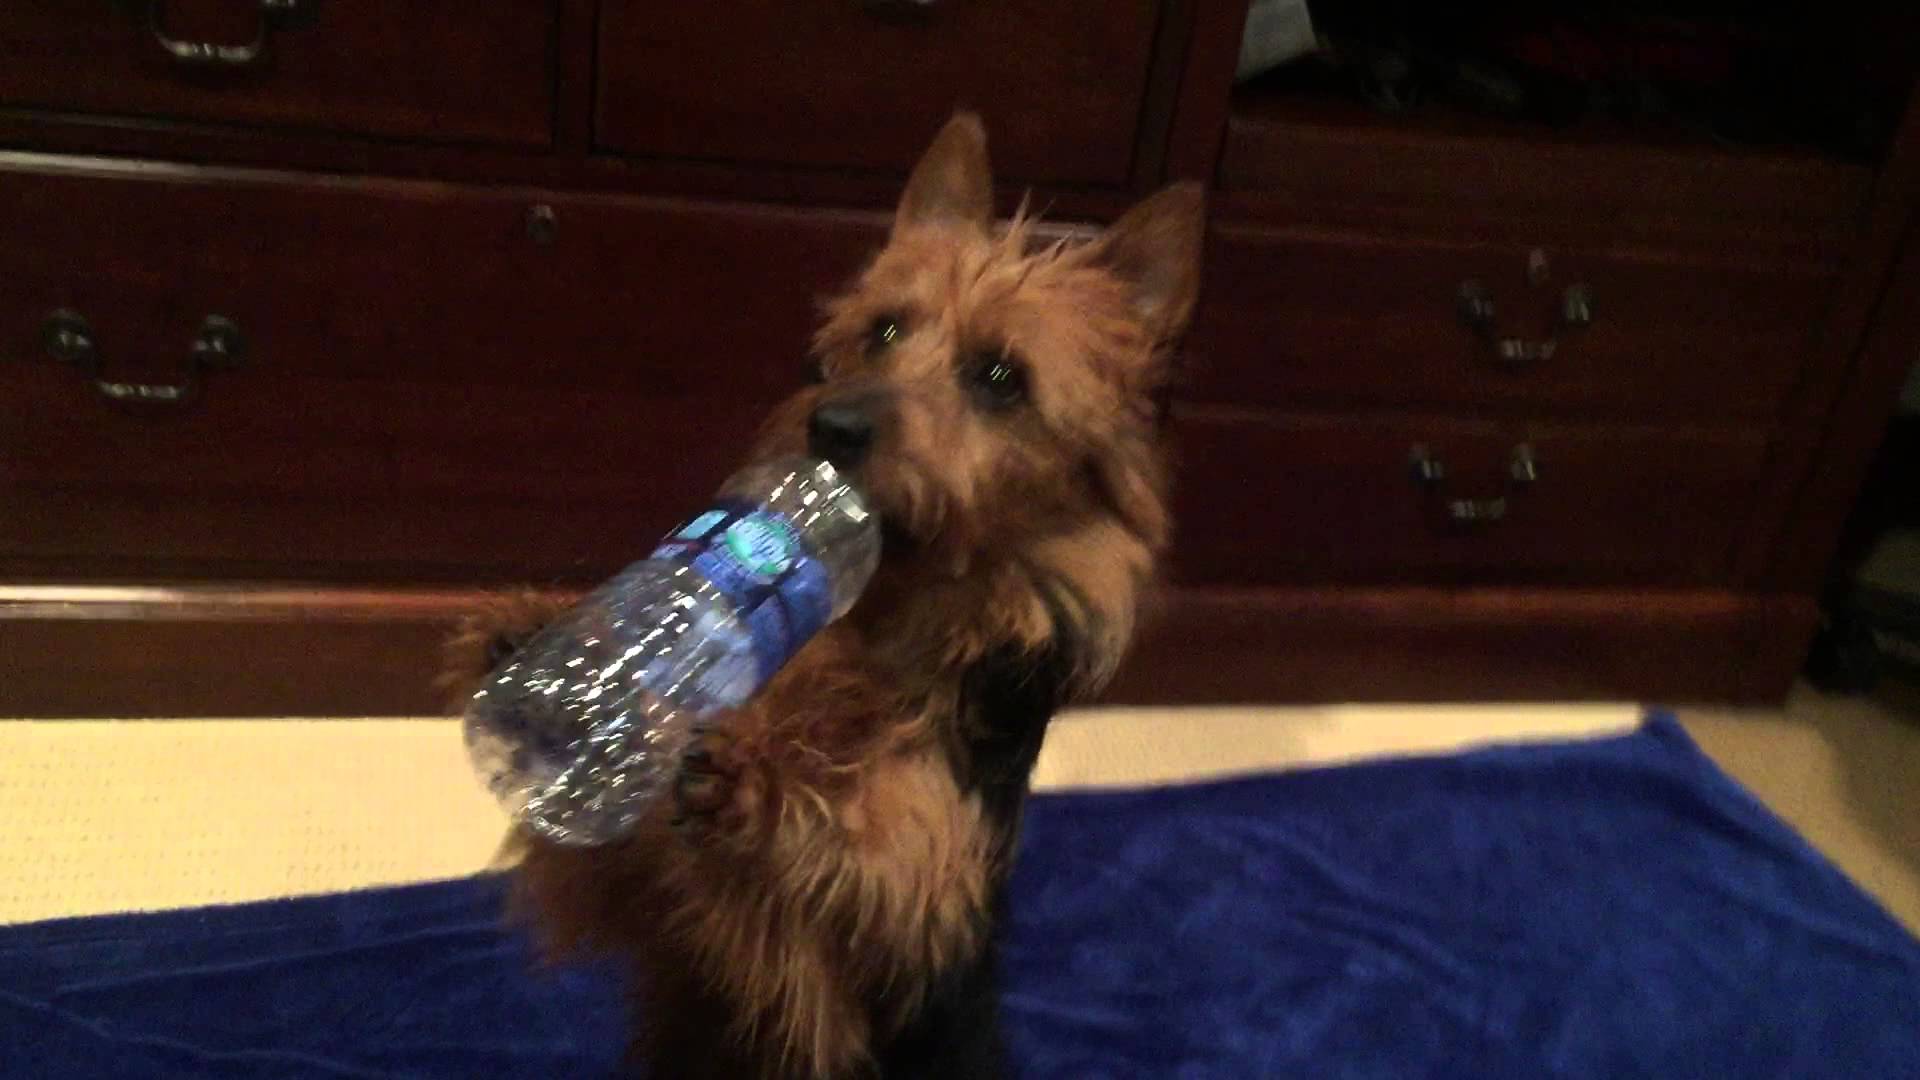 Dog drinking water out of a bottle like a human - YouTube